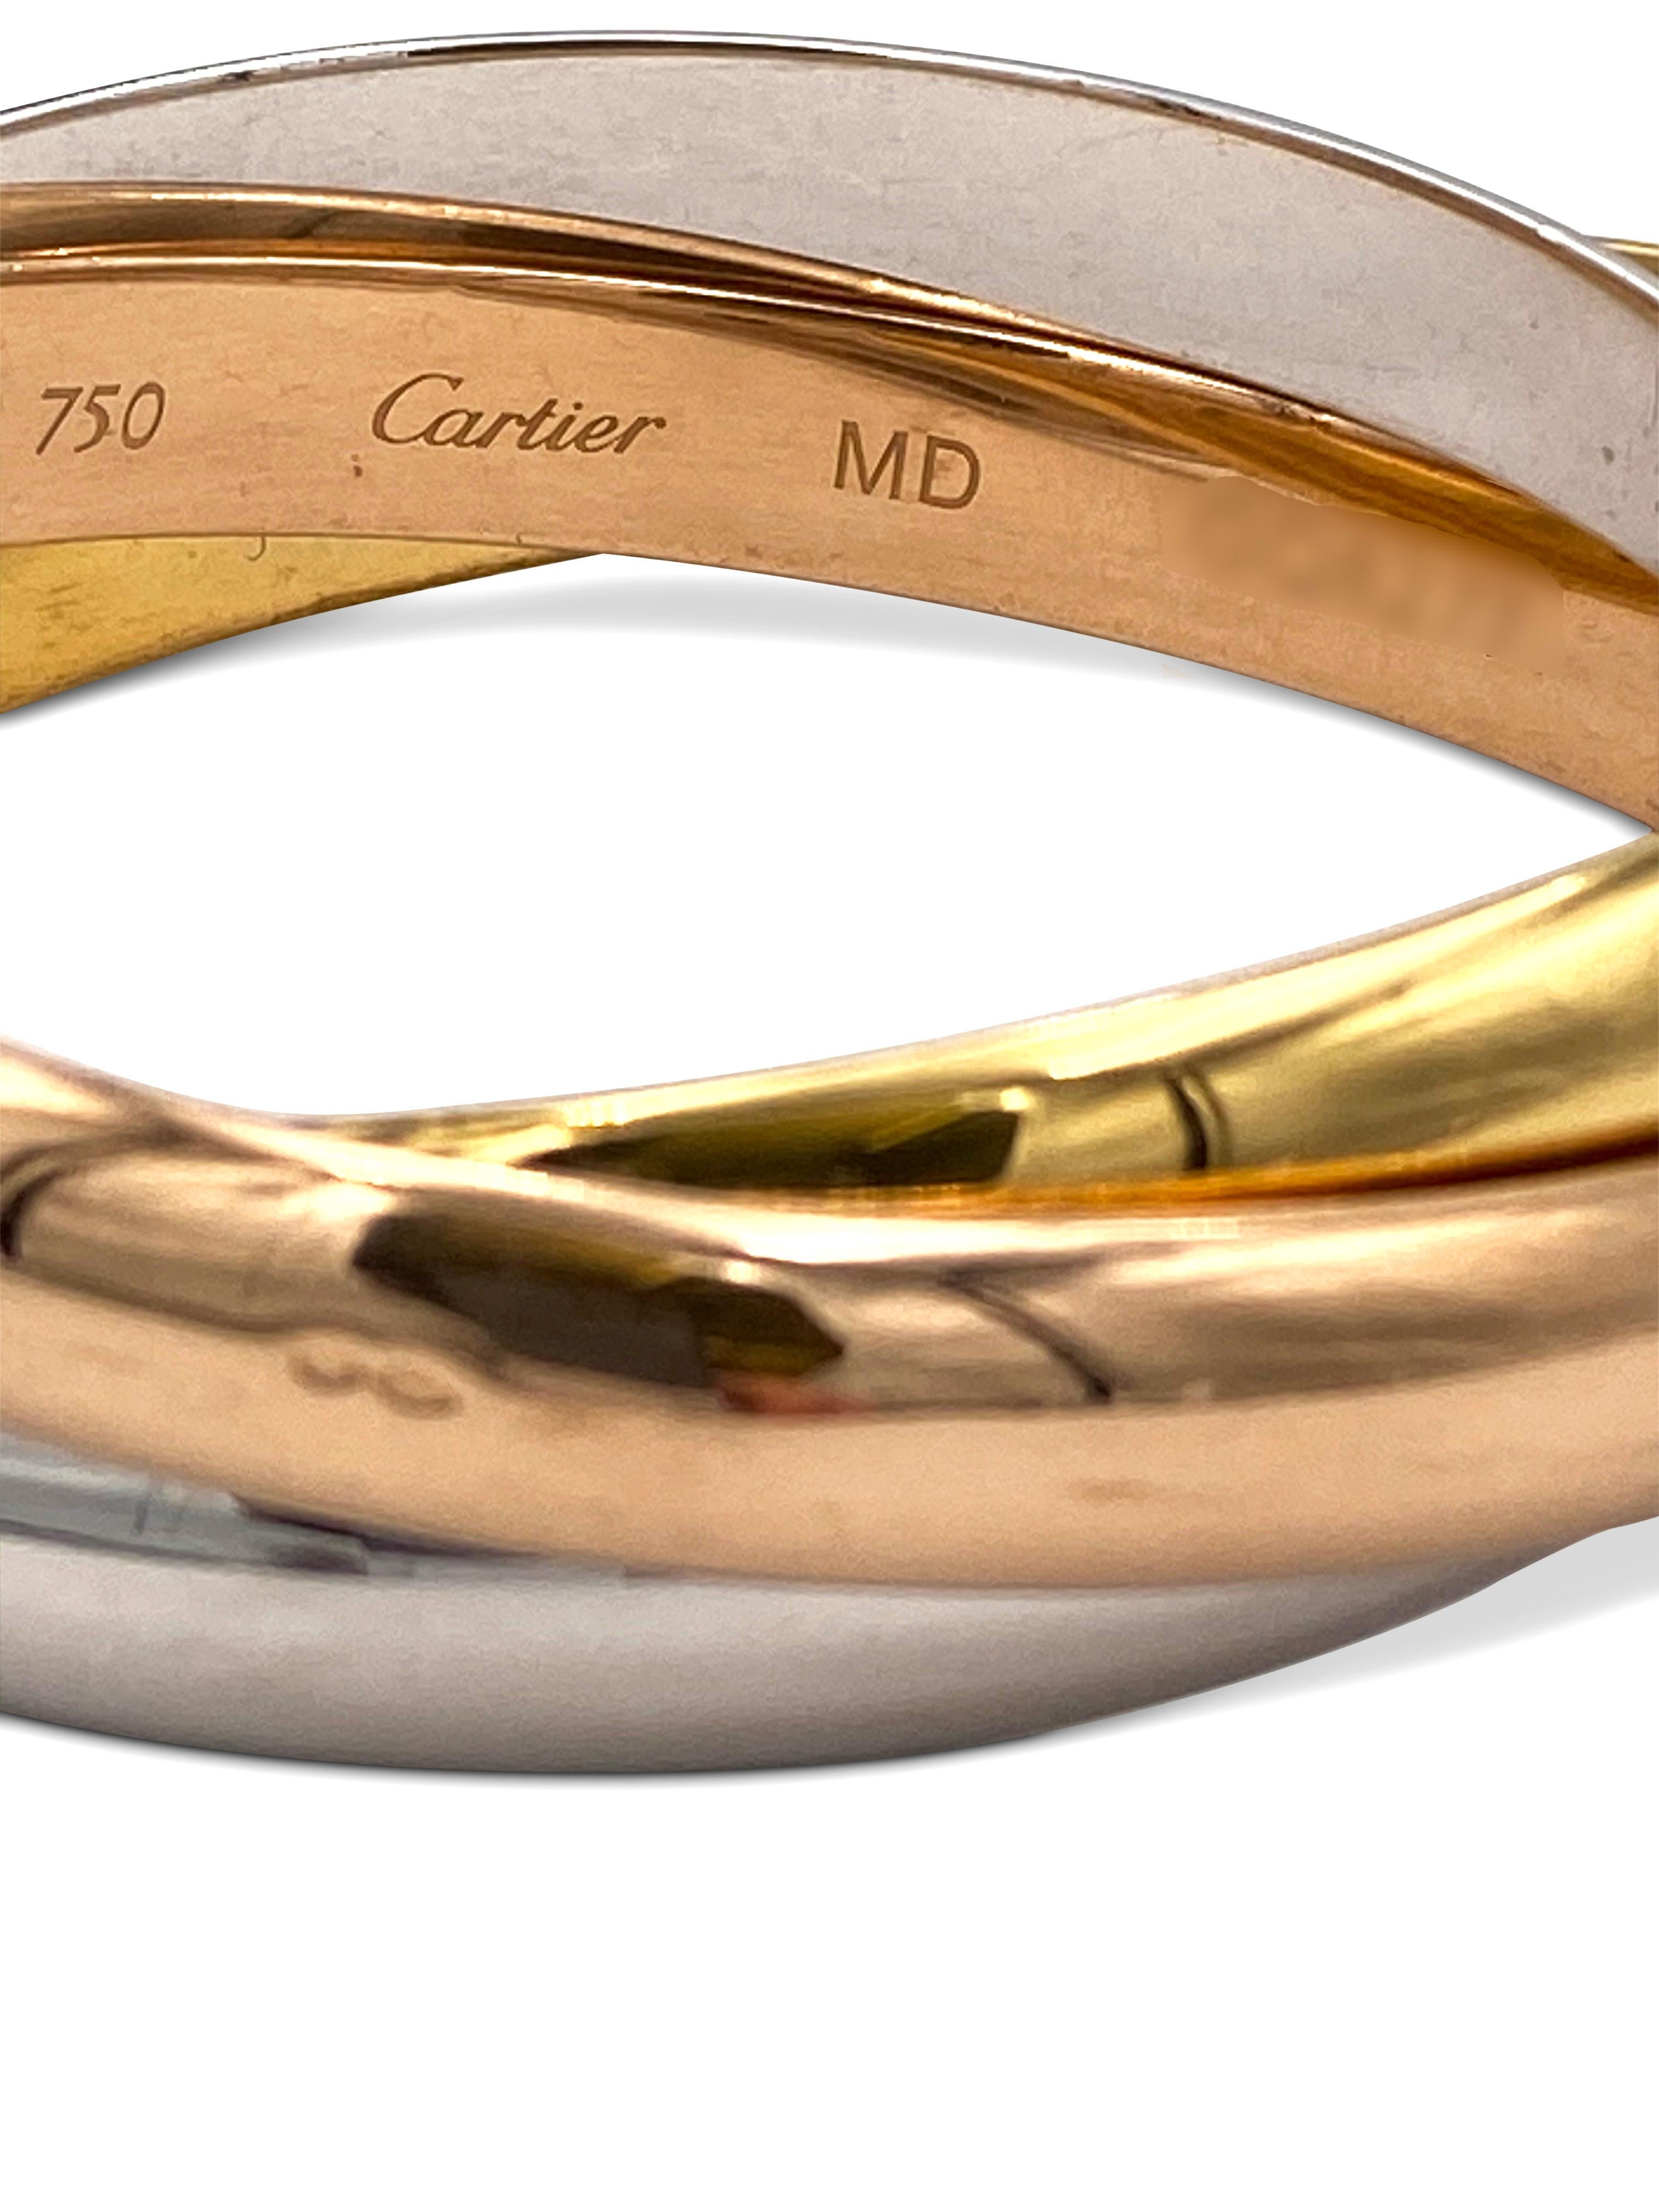 Authentic Cartier Trinity rolling bracelet crafted in 18 karat white, yellow, and rose gold. Each ring measures 9mm in width. Bracelet will fit up to size 7 1/2 comfortably. Stamped 750, Cartier, with serial number and import marks. Bracelet is